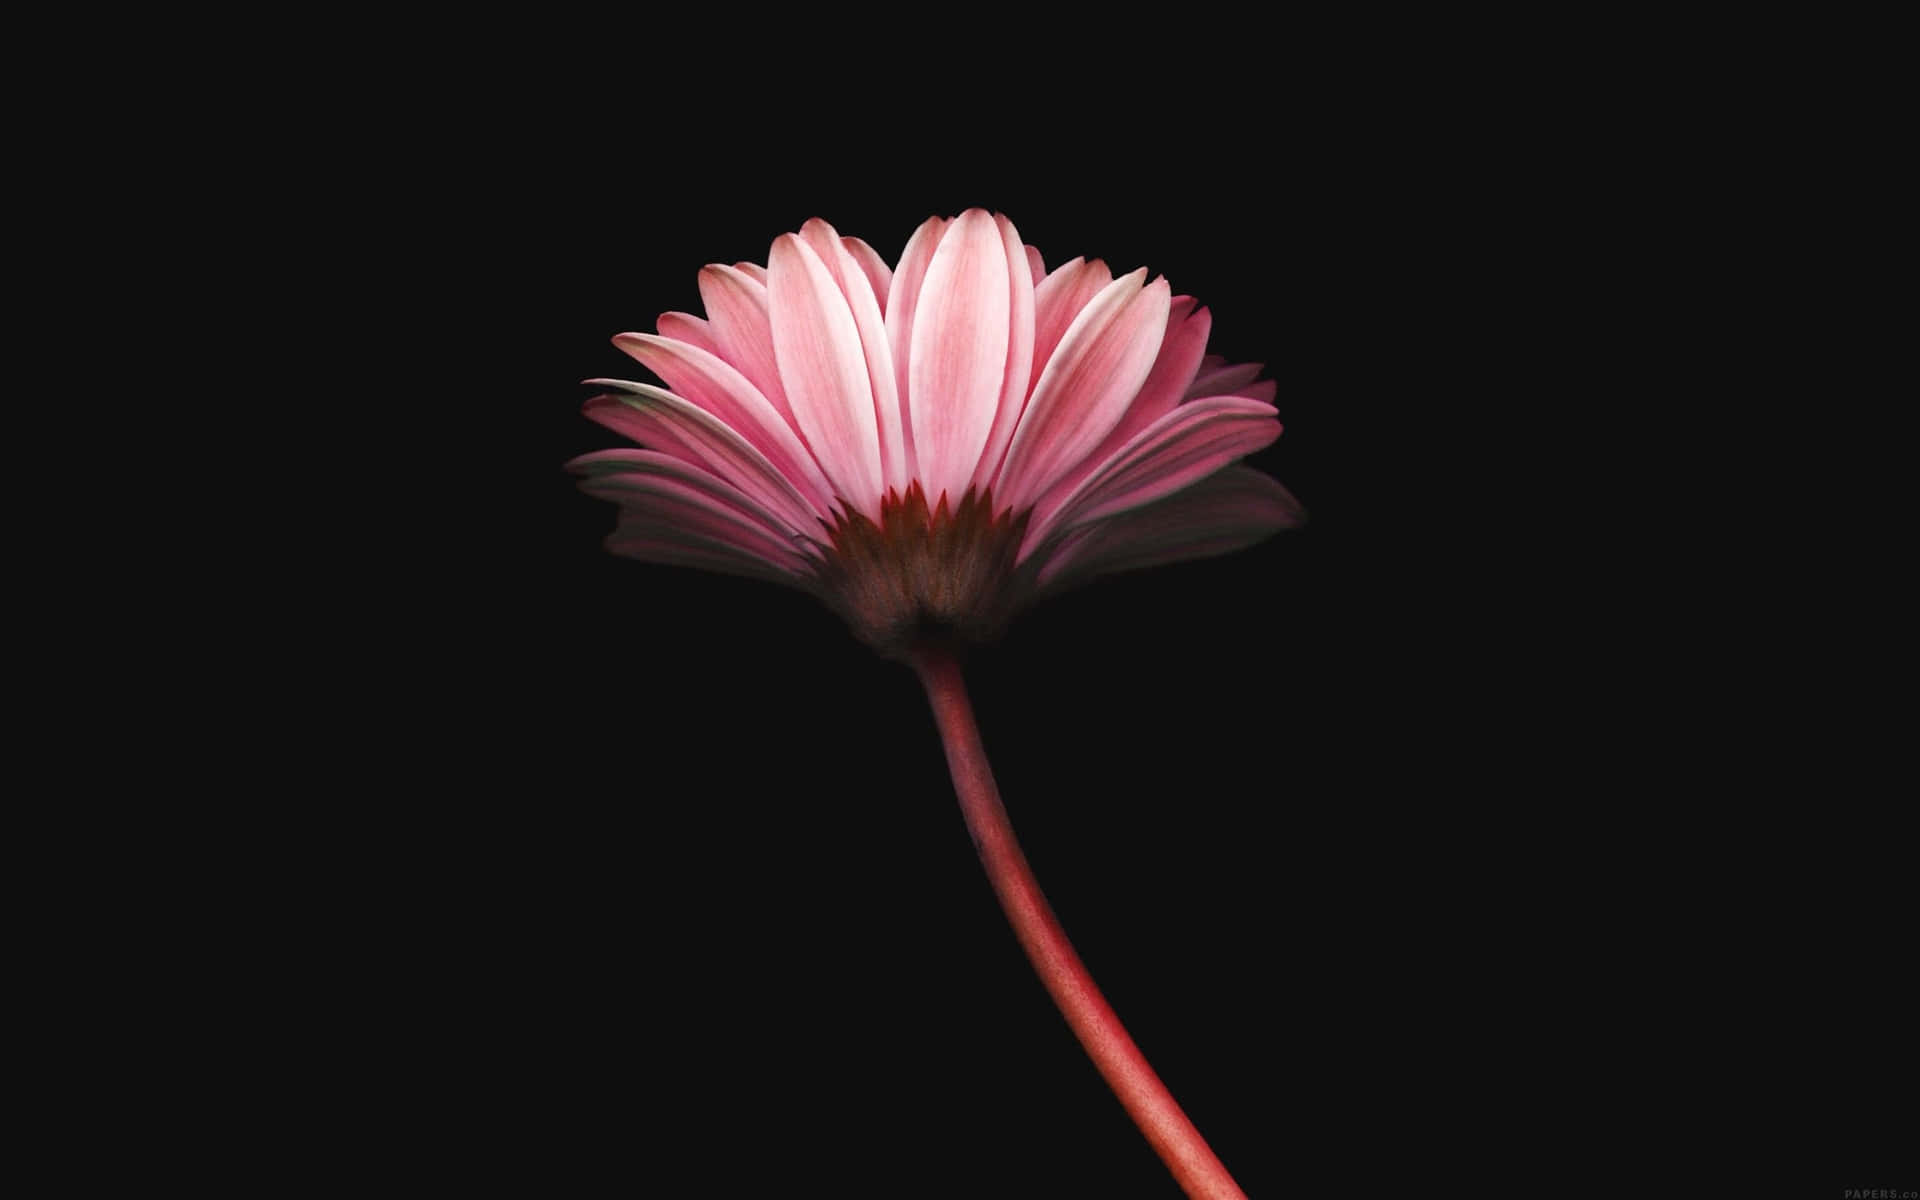 Captivating Simplicity: A Stunning Close-up of a Flower on a Minimalistic Background